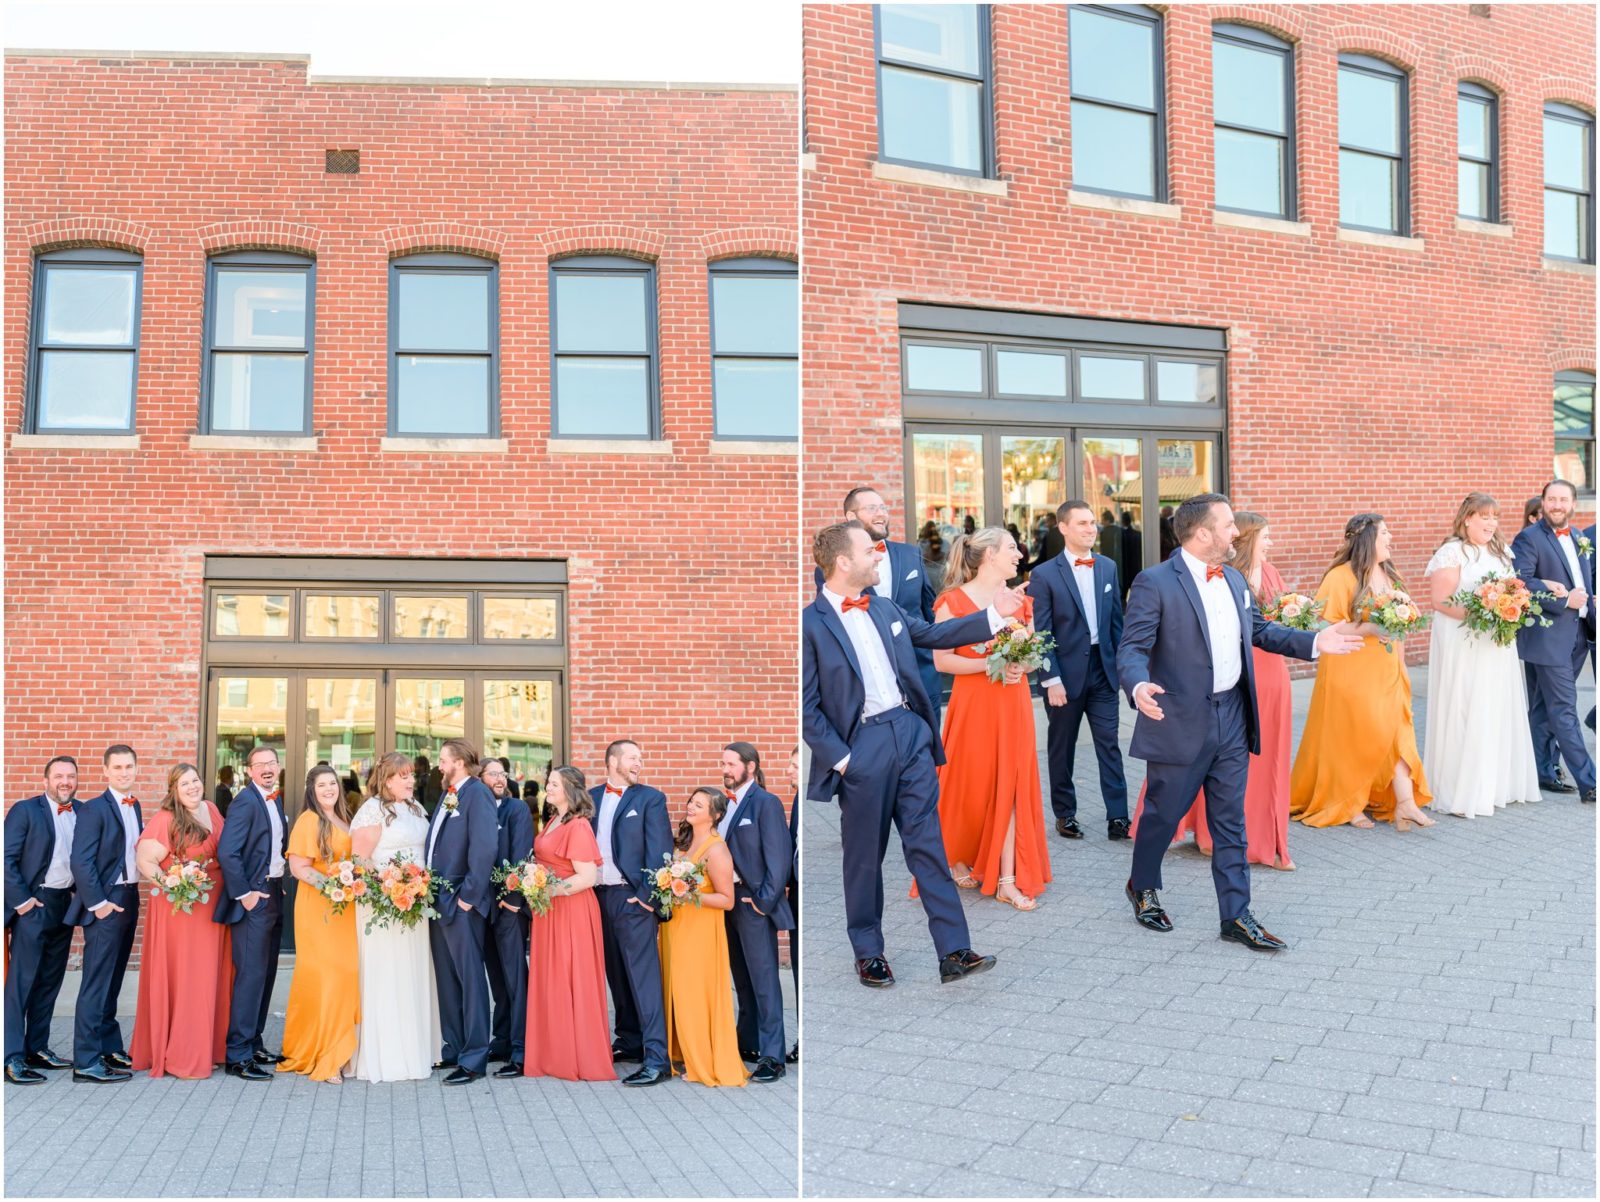 Bridal party laughing together Fountain Square Theatre wedding